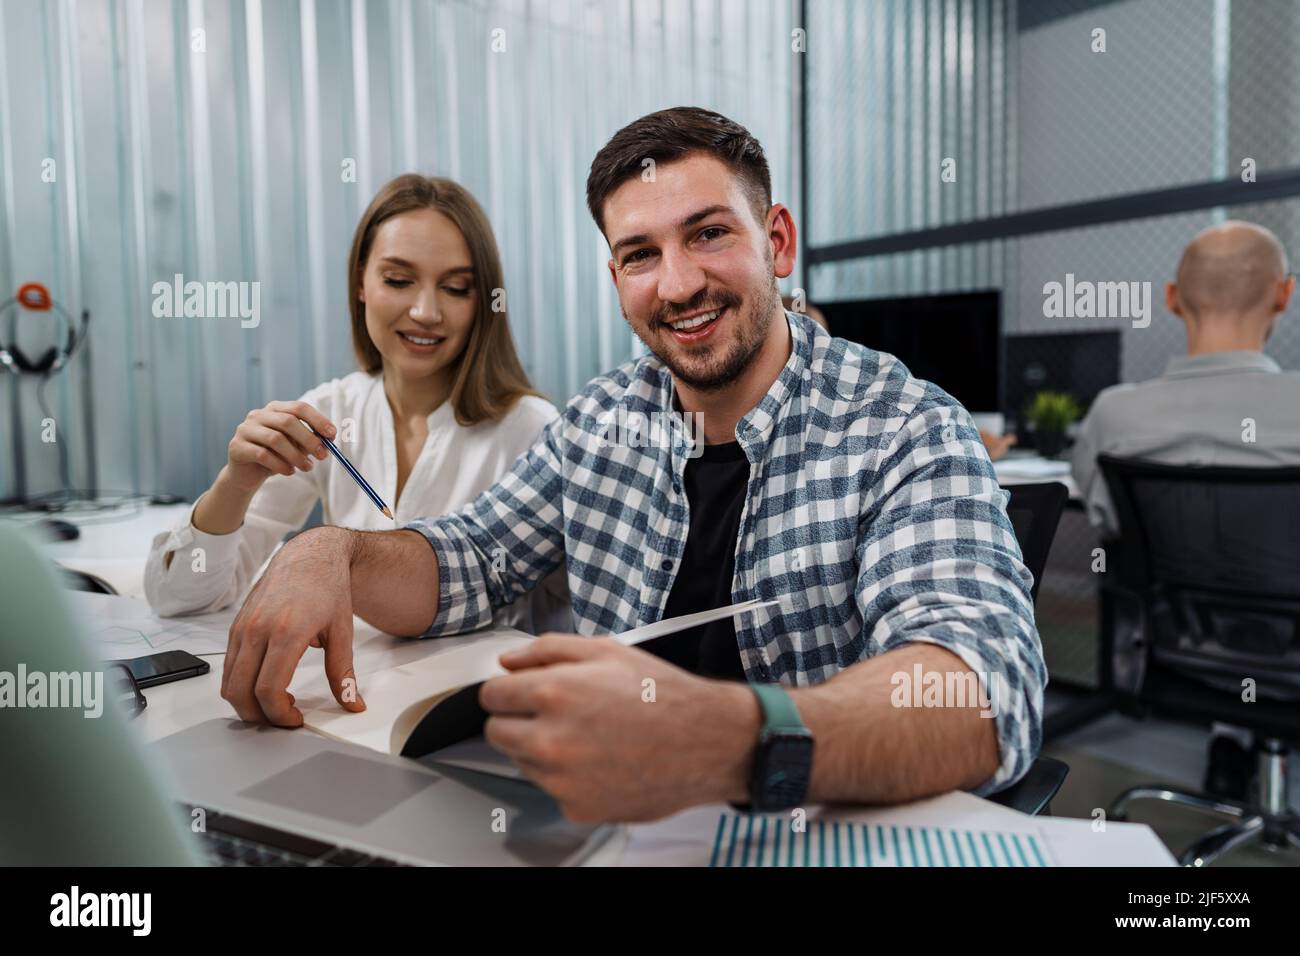 Two entrepreneurs man and woman sitting together working in an office Stock Photo